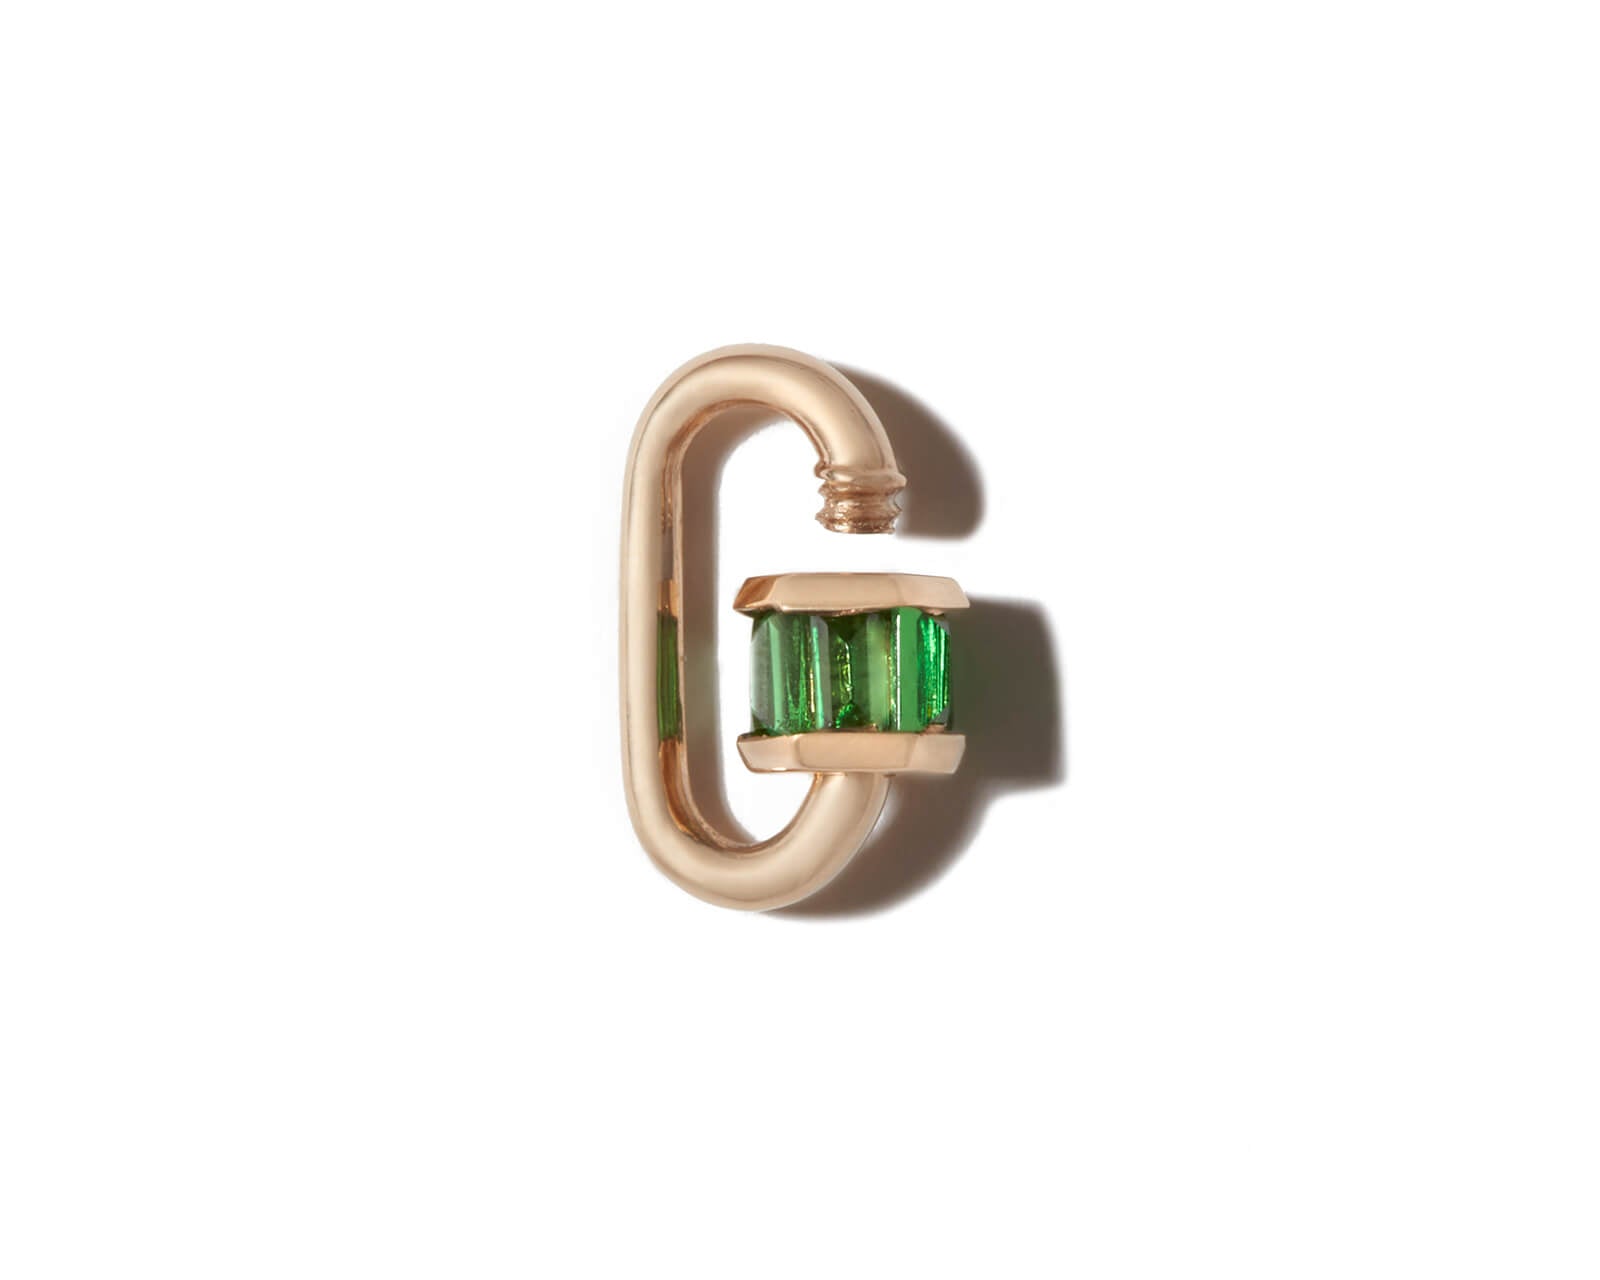 Green garnet jewelry lock with open clasp against white backdrop 